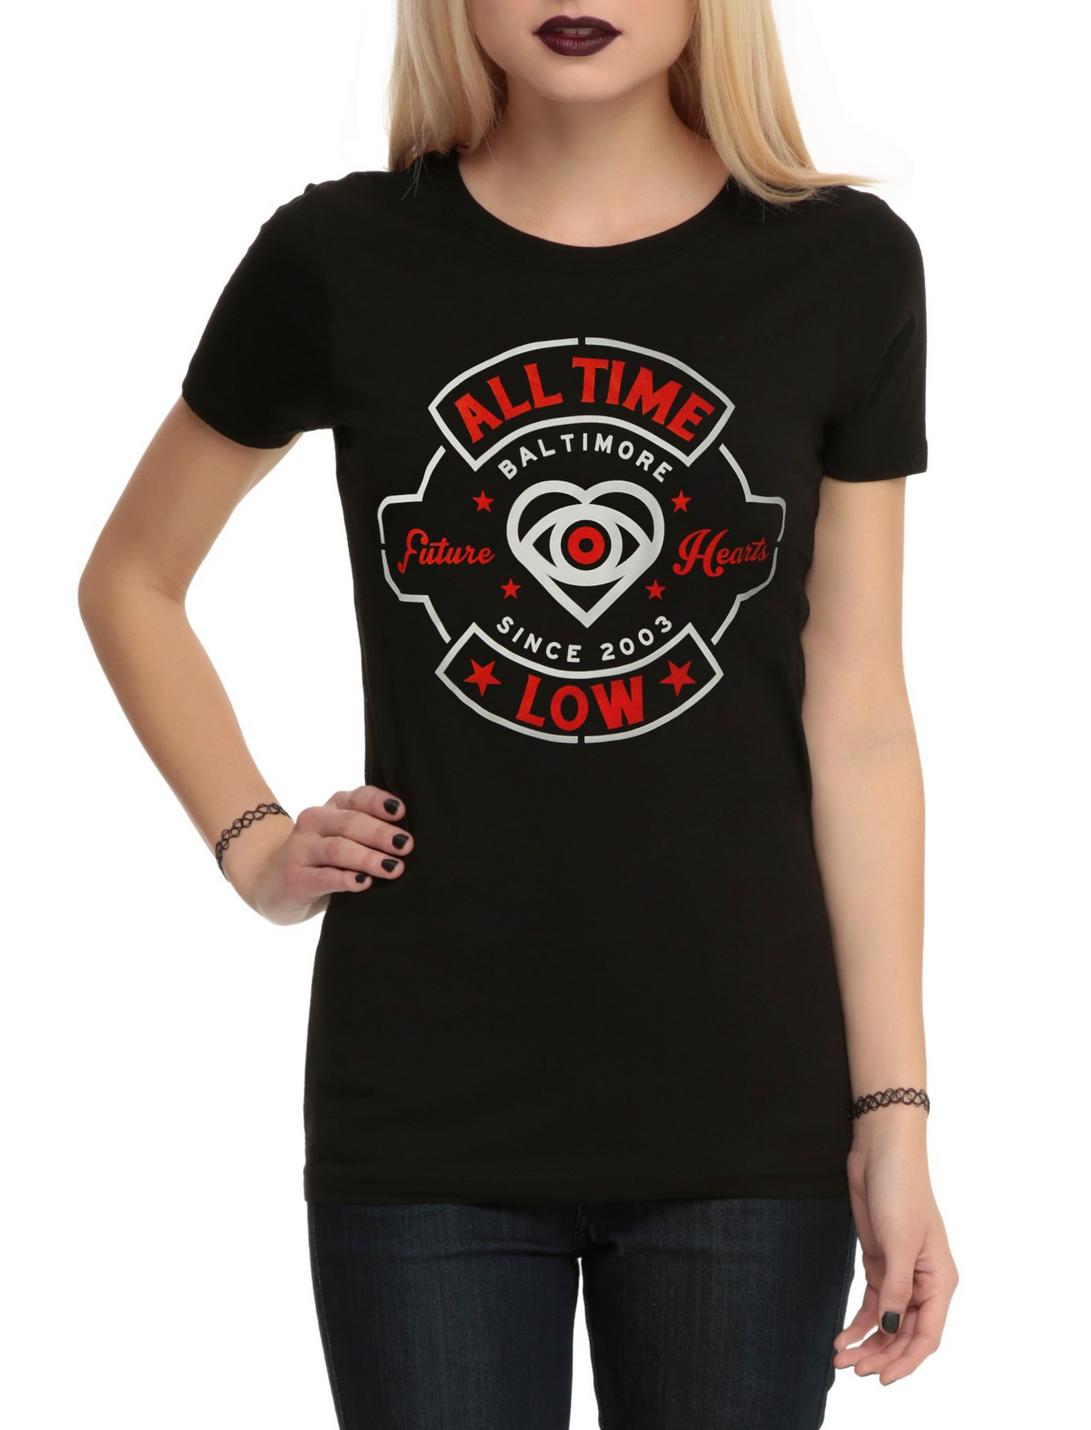 All Time Low Red & White Seal Girls T-Shirt, BLACK, hi-res